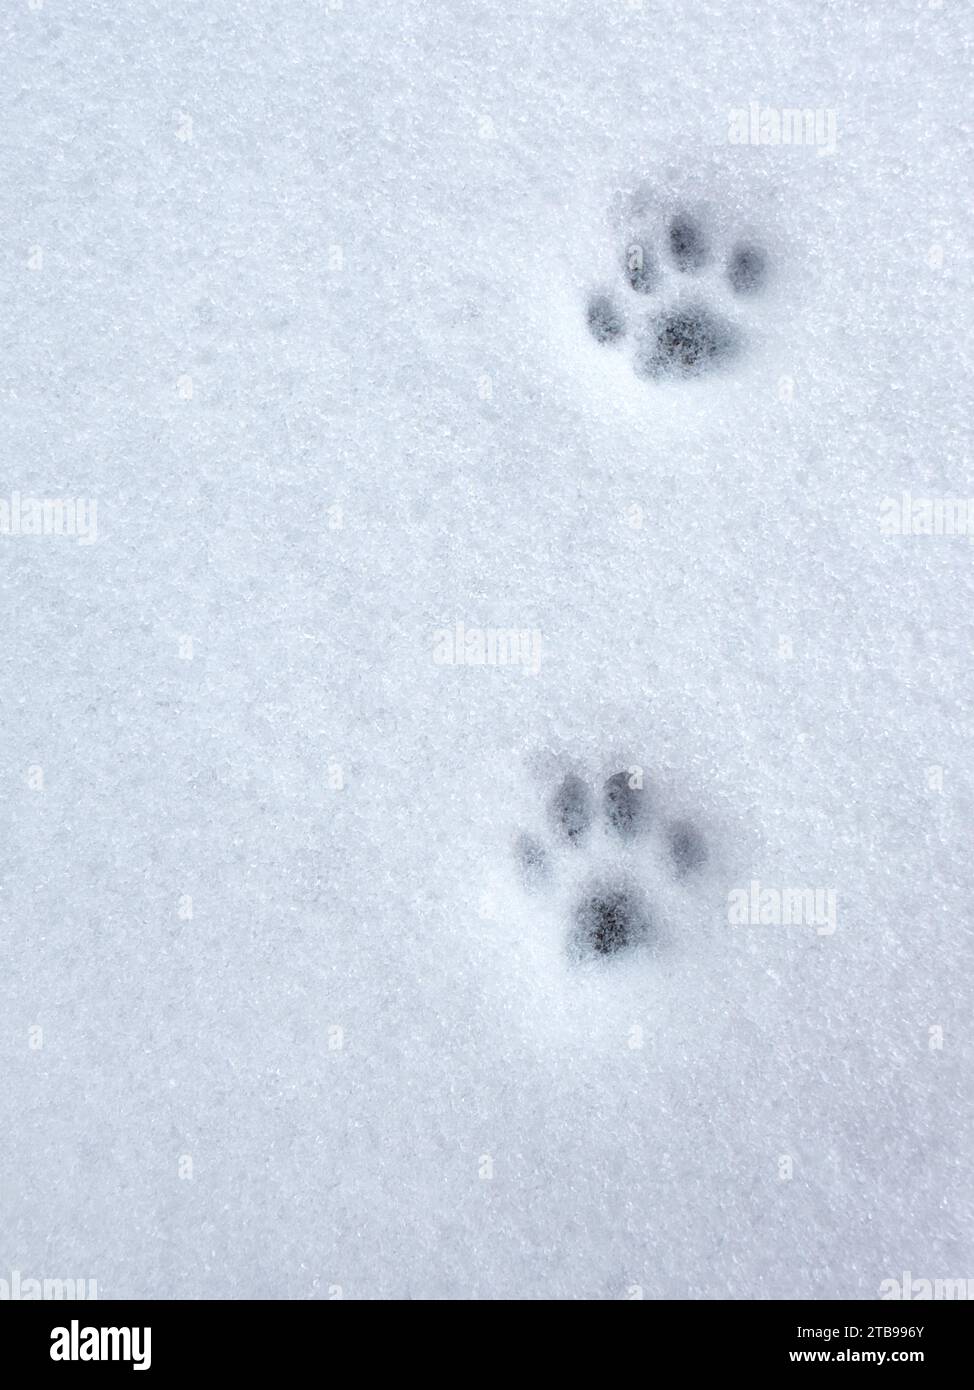 Trace of cat, animal footprint on the fresh white snow, copy space, top view Stock Photo